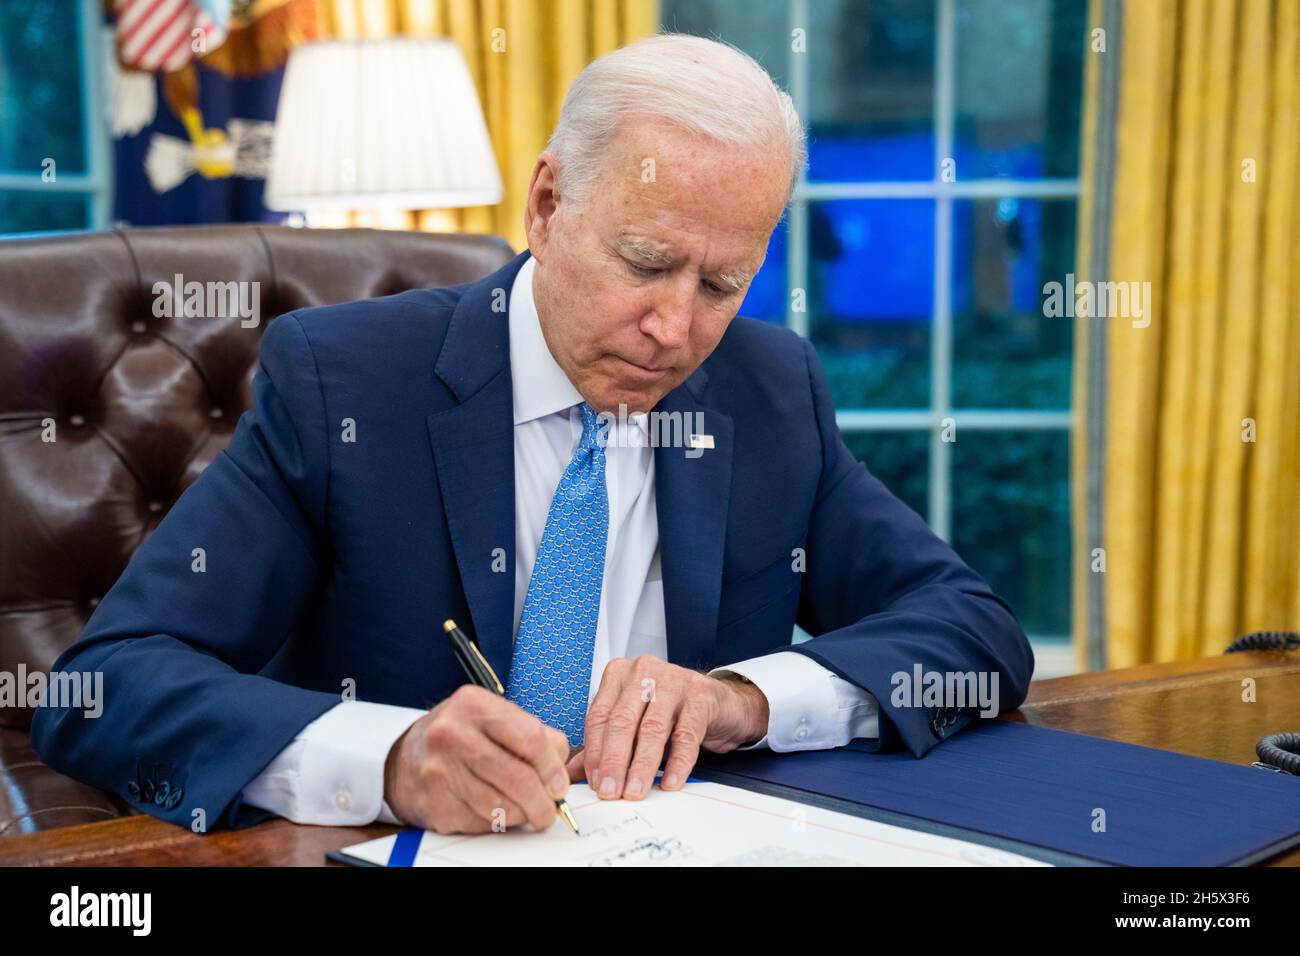 Washington, United States. 31 August, 2021. U.S. President Joe Biden signs the Emergency Reparation Assistance for Returning Americans Act, in the Oval Office of the White House August 31, 2021 in Washington, D.C. Credit: Adam Schultz/White House Photo/Alamy Live News Stock Photo